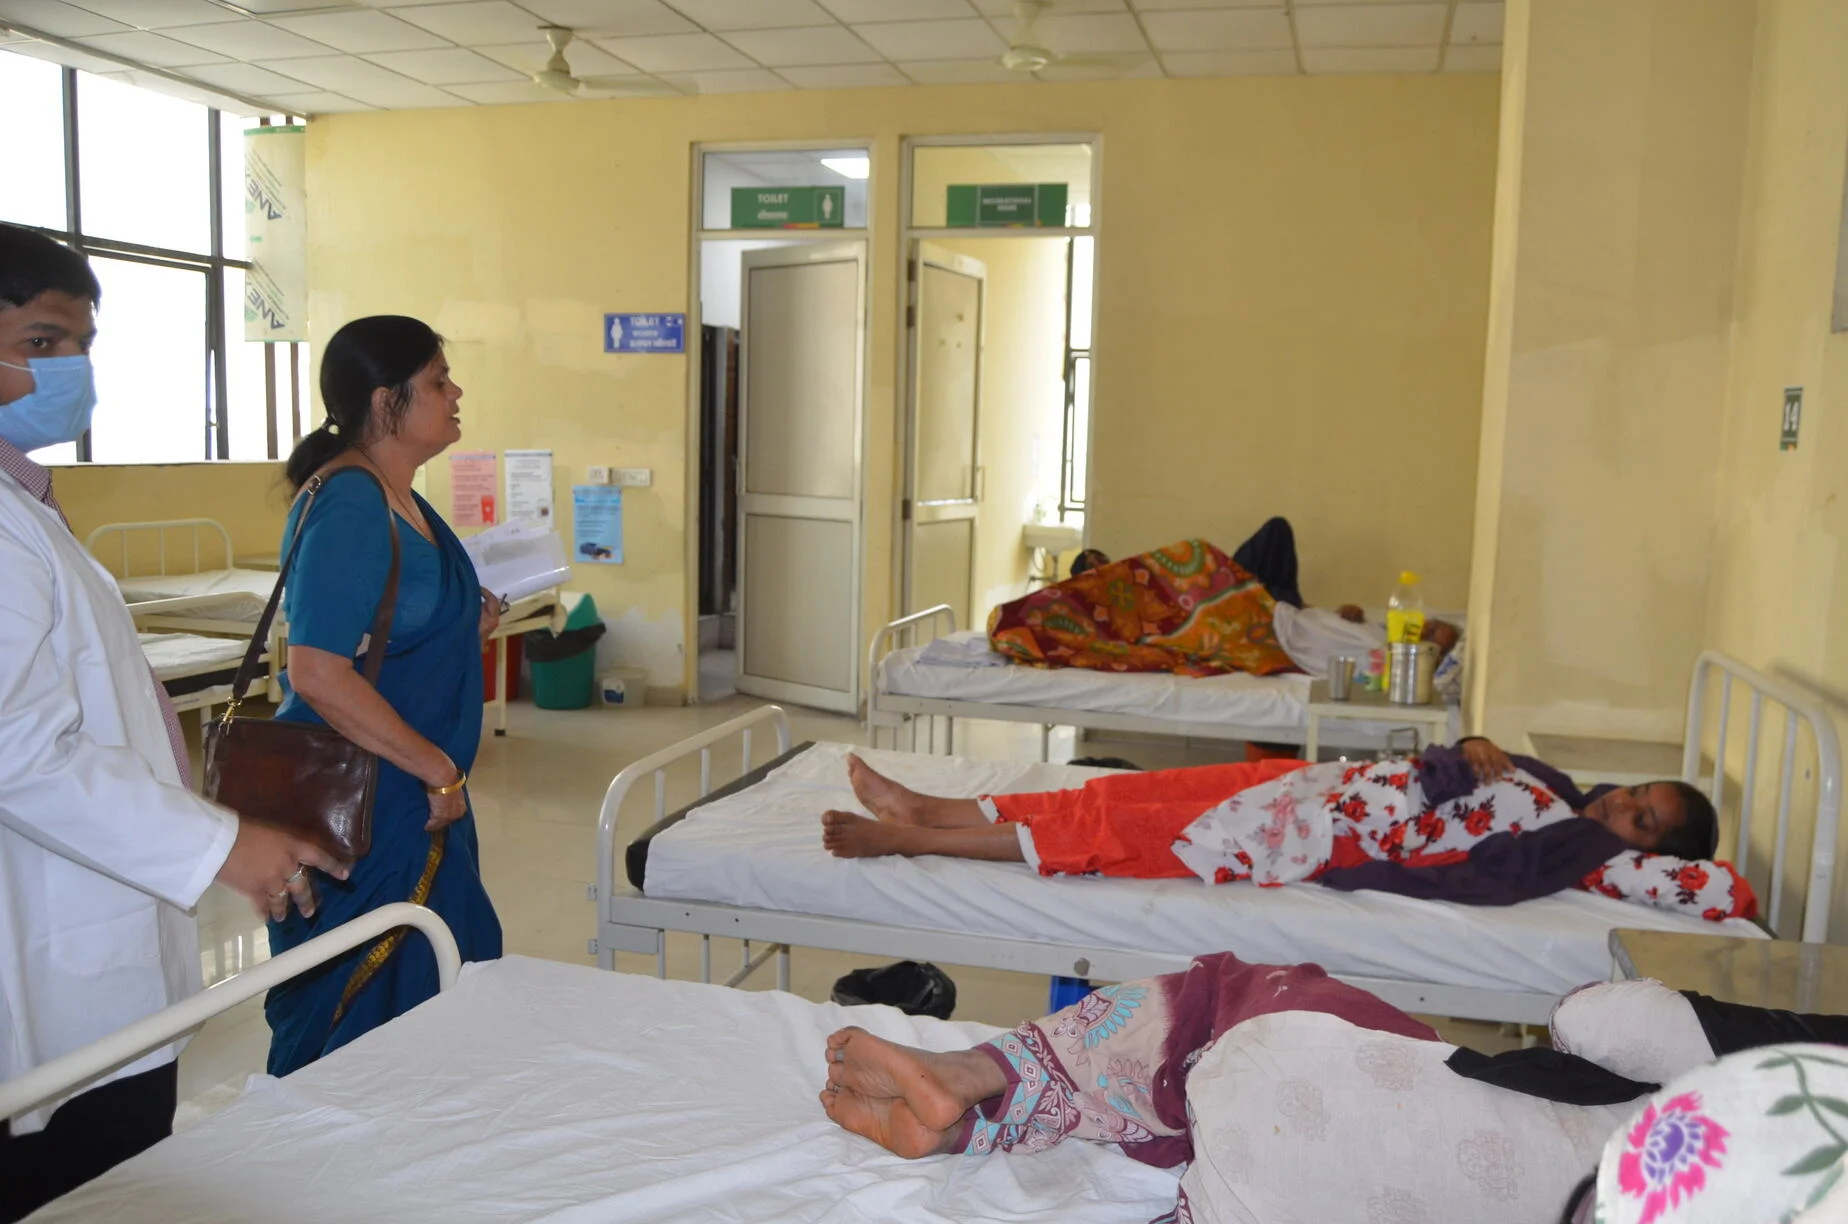 Four People in General Ward of GS Hospital